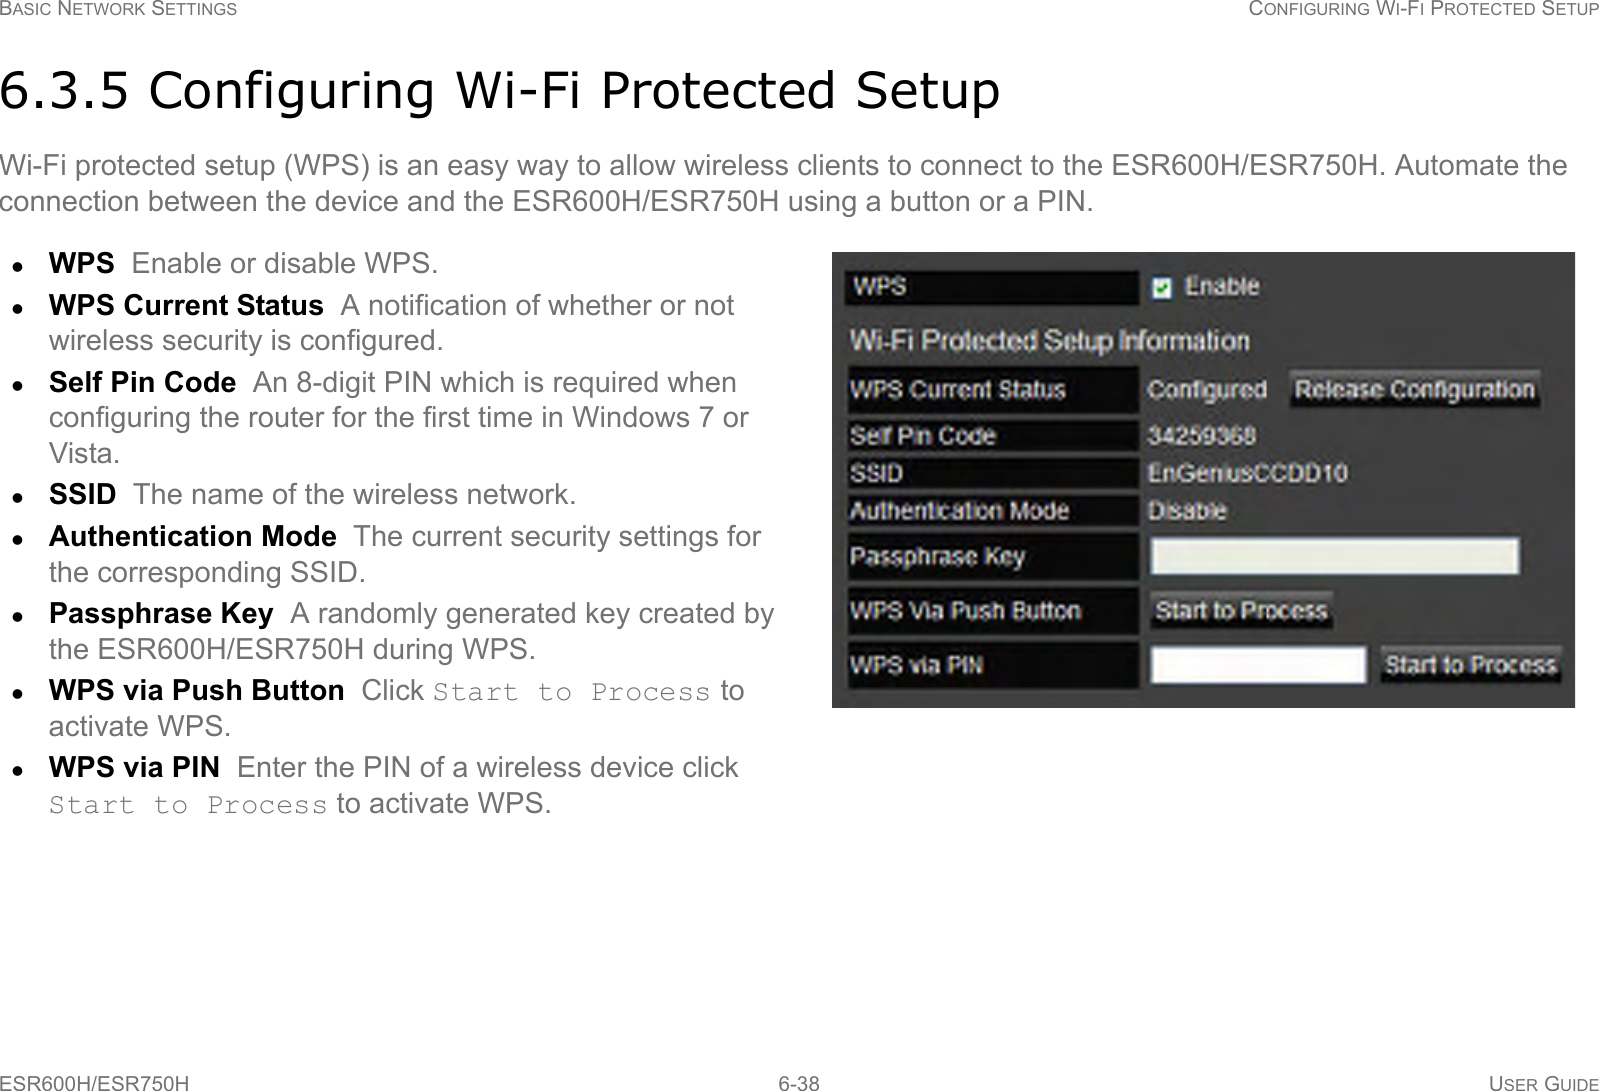 BASIC NETWORK SETTINGS CONFIGURING WI-FI PROTECTED SETUPESR600H/ESR750H 6-38 USER GUIDE6.3.5 Configuring Wi-Fi Protected SetupWi-Fi protected setup (WPS) is an easy way to allow wireless clients to connect to the ESR600H/ESR750H. Automate the connection between the device and the ESR600H/ESR750H using a button or a PIN.WPS  Enable or disable WPS.WPS Current Status  A notification of whether or not wireless security is configured.Self Pin Code  An 8-digit PIN which is required when configuring the router for the first time in Windows 7 or Vista.SSID  The name of the wireless network.Authentication Mode  The current security settings for the corresponding SSID.Passphrase Key  A randomly generated key created by the ESR600H/ESR750H during WPS.WPS via Push Button  Click Start to Process to activate WPS.WPS via PIN  Enter the PIN of a wireless device click Start to Process to activate WPS.